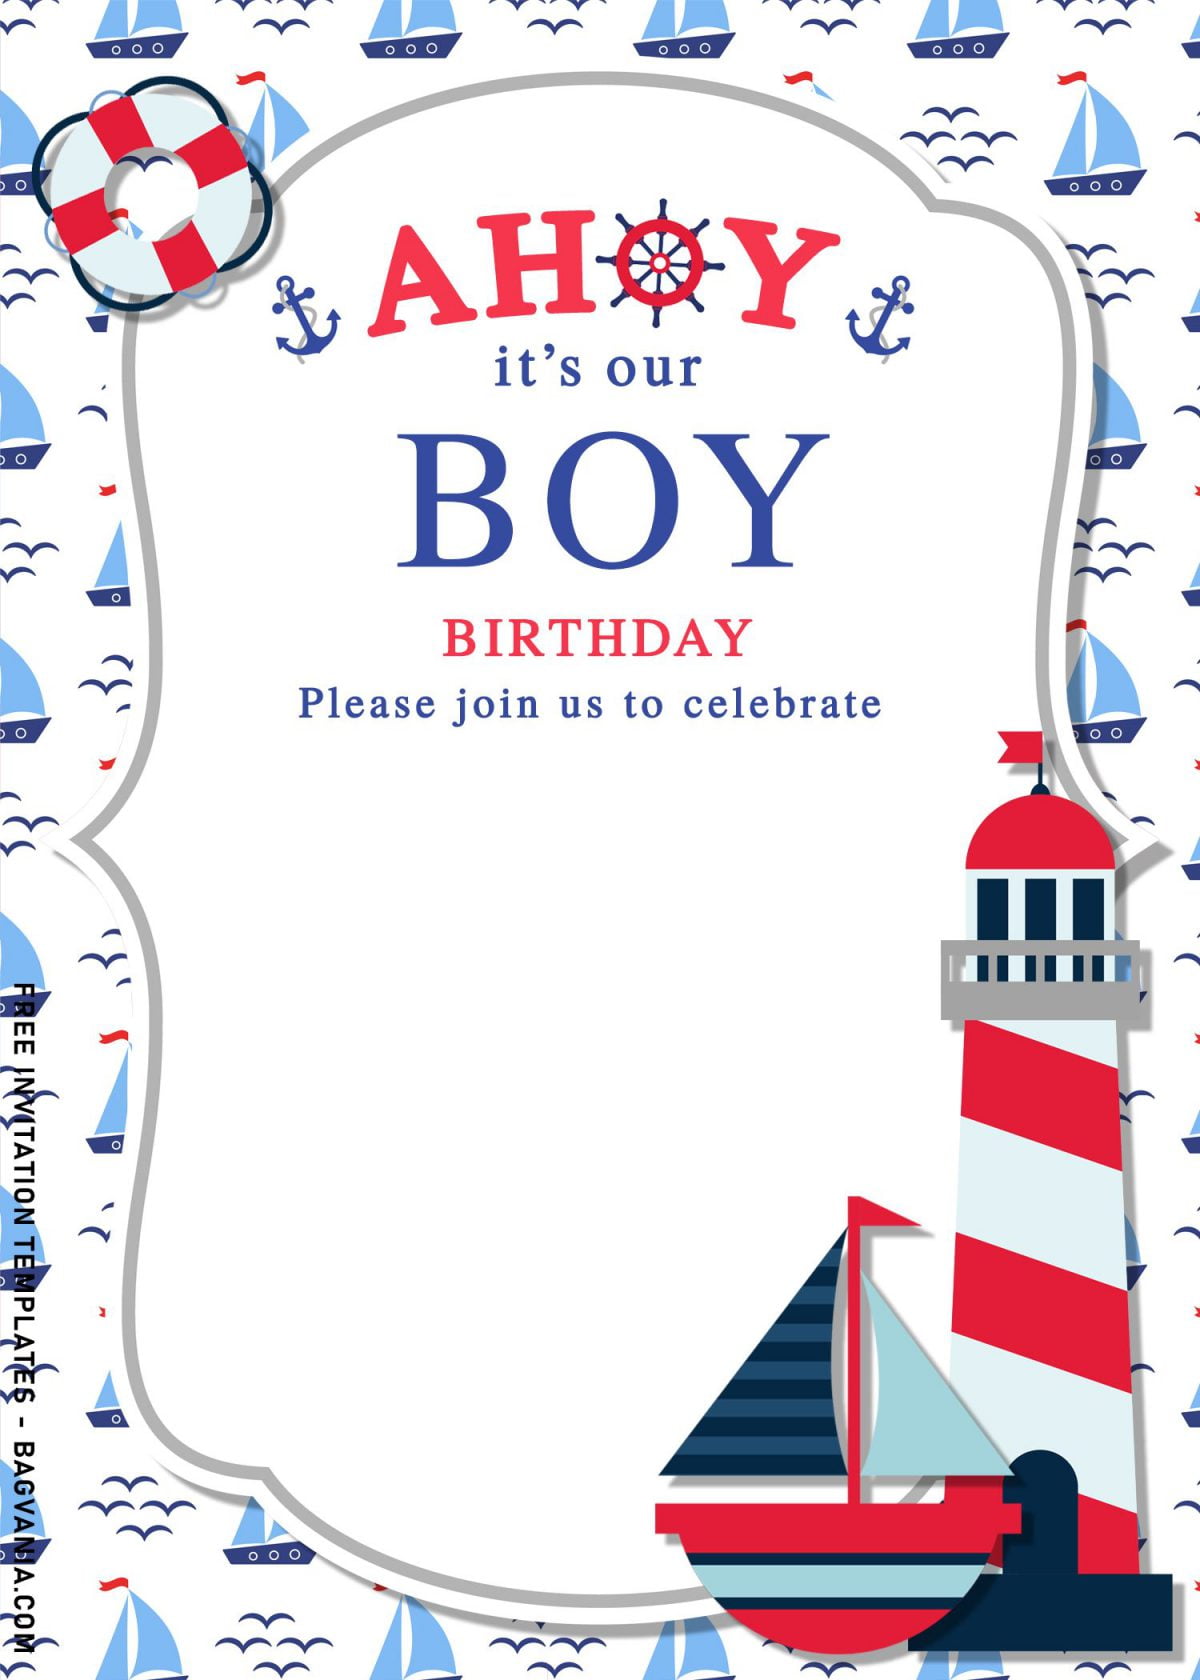 11+ Nautical Themed Birthday Invitation Templates For Your Kid’s Birthday Bash and has cute lighthouse painted in white and red